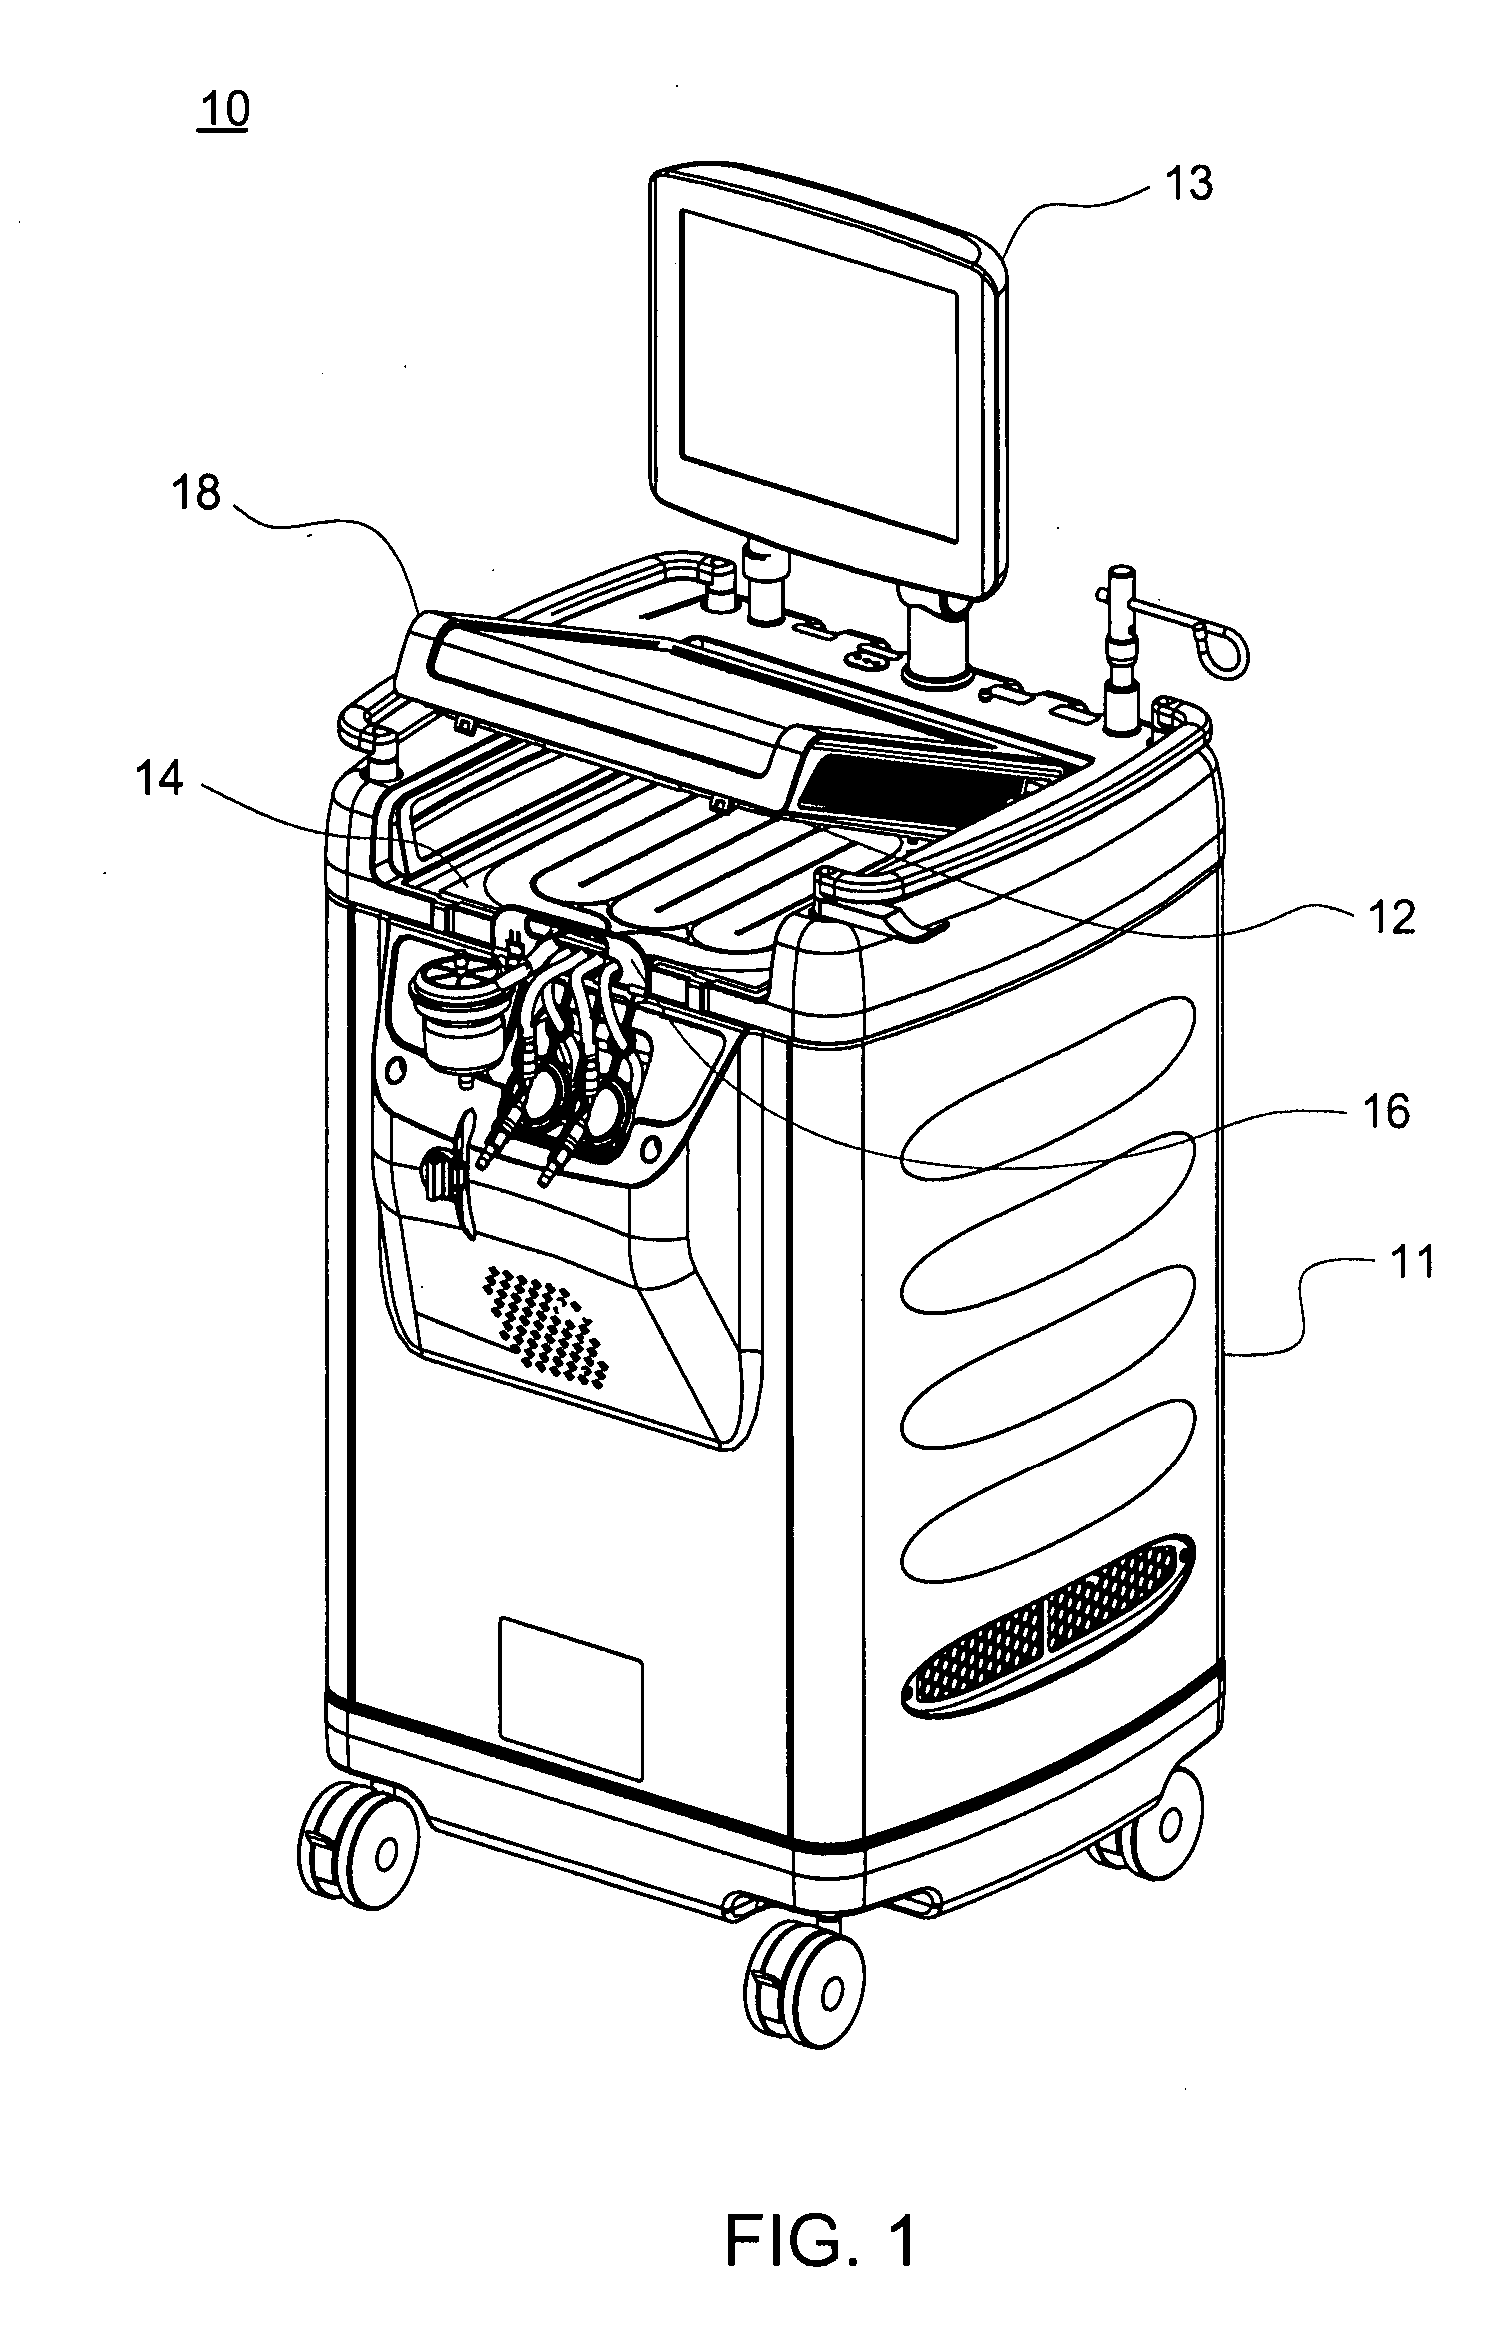 Thermal and conductivity sensing systems, devices and methods